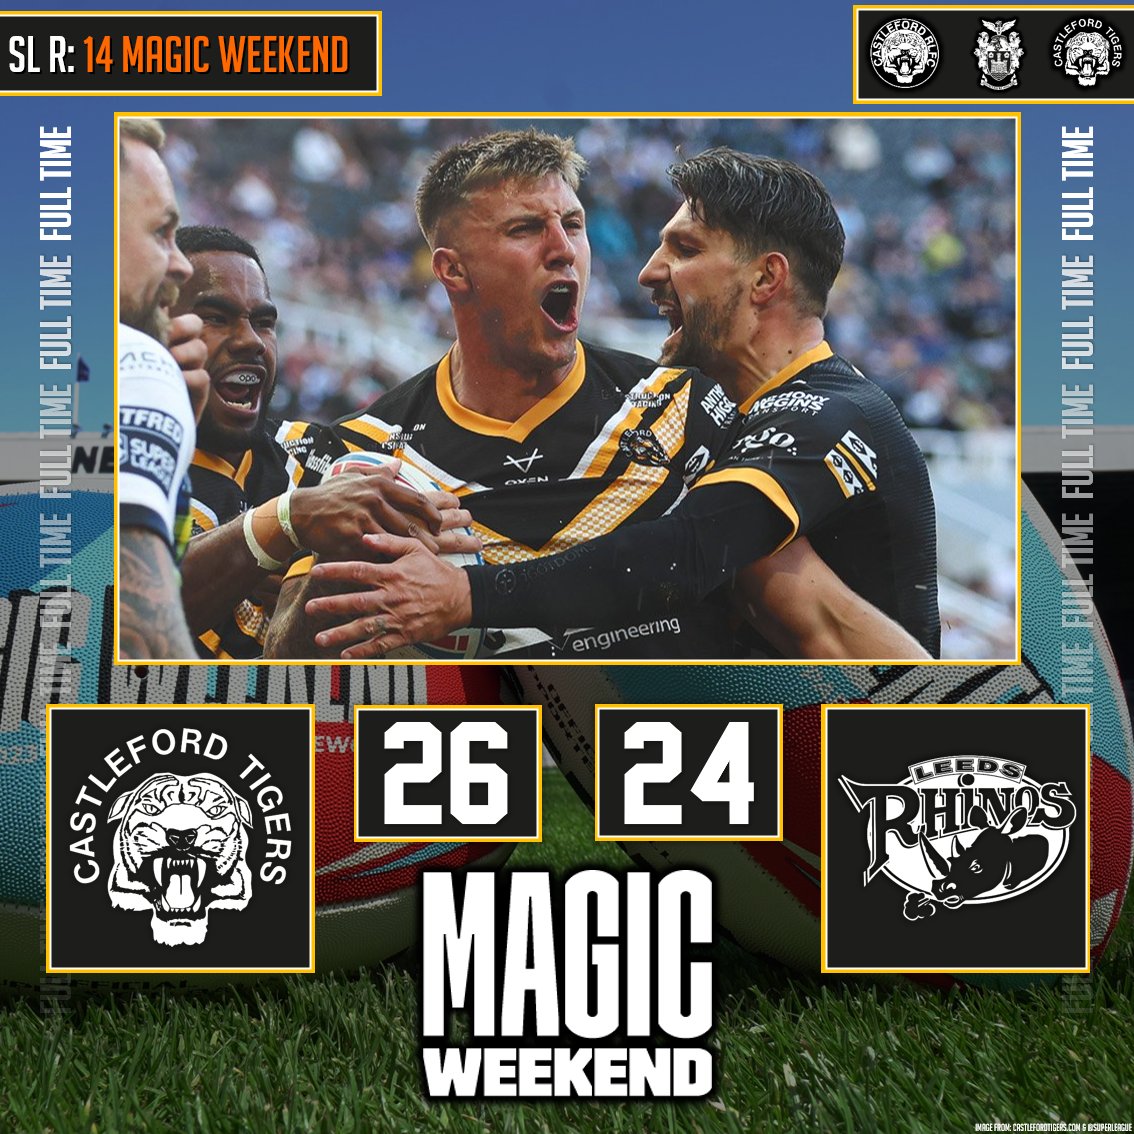 🪄 MAGIC WEEKEND🏉 SL ROUND: 1⃣4⃣

🐯 CASTLEFORD TIGERS 2⃣6⃣
🦏 LEEDS RHINOS 2⃣4⃣

👏 WE NEED THAT ONE👏

COME ON YOU FORDS!!!

Was great to see the players celebrating defence & attacking efforts and the emotion at the end. 👏👏  

#COYF #SLCasLee #MagicWeekend #SuperLeague